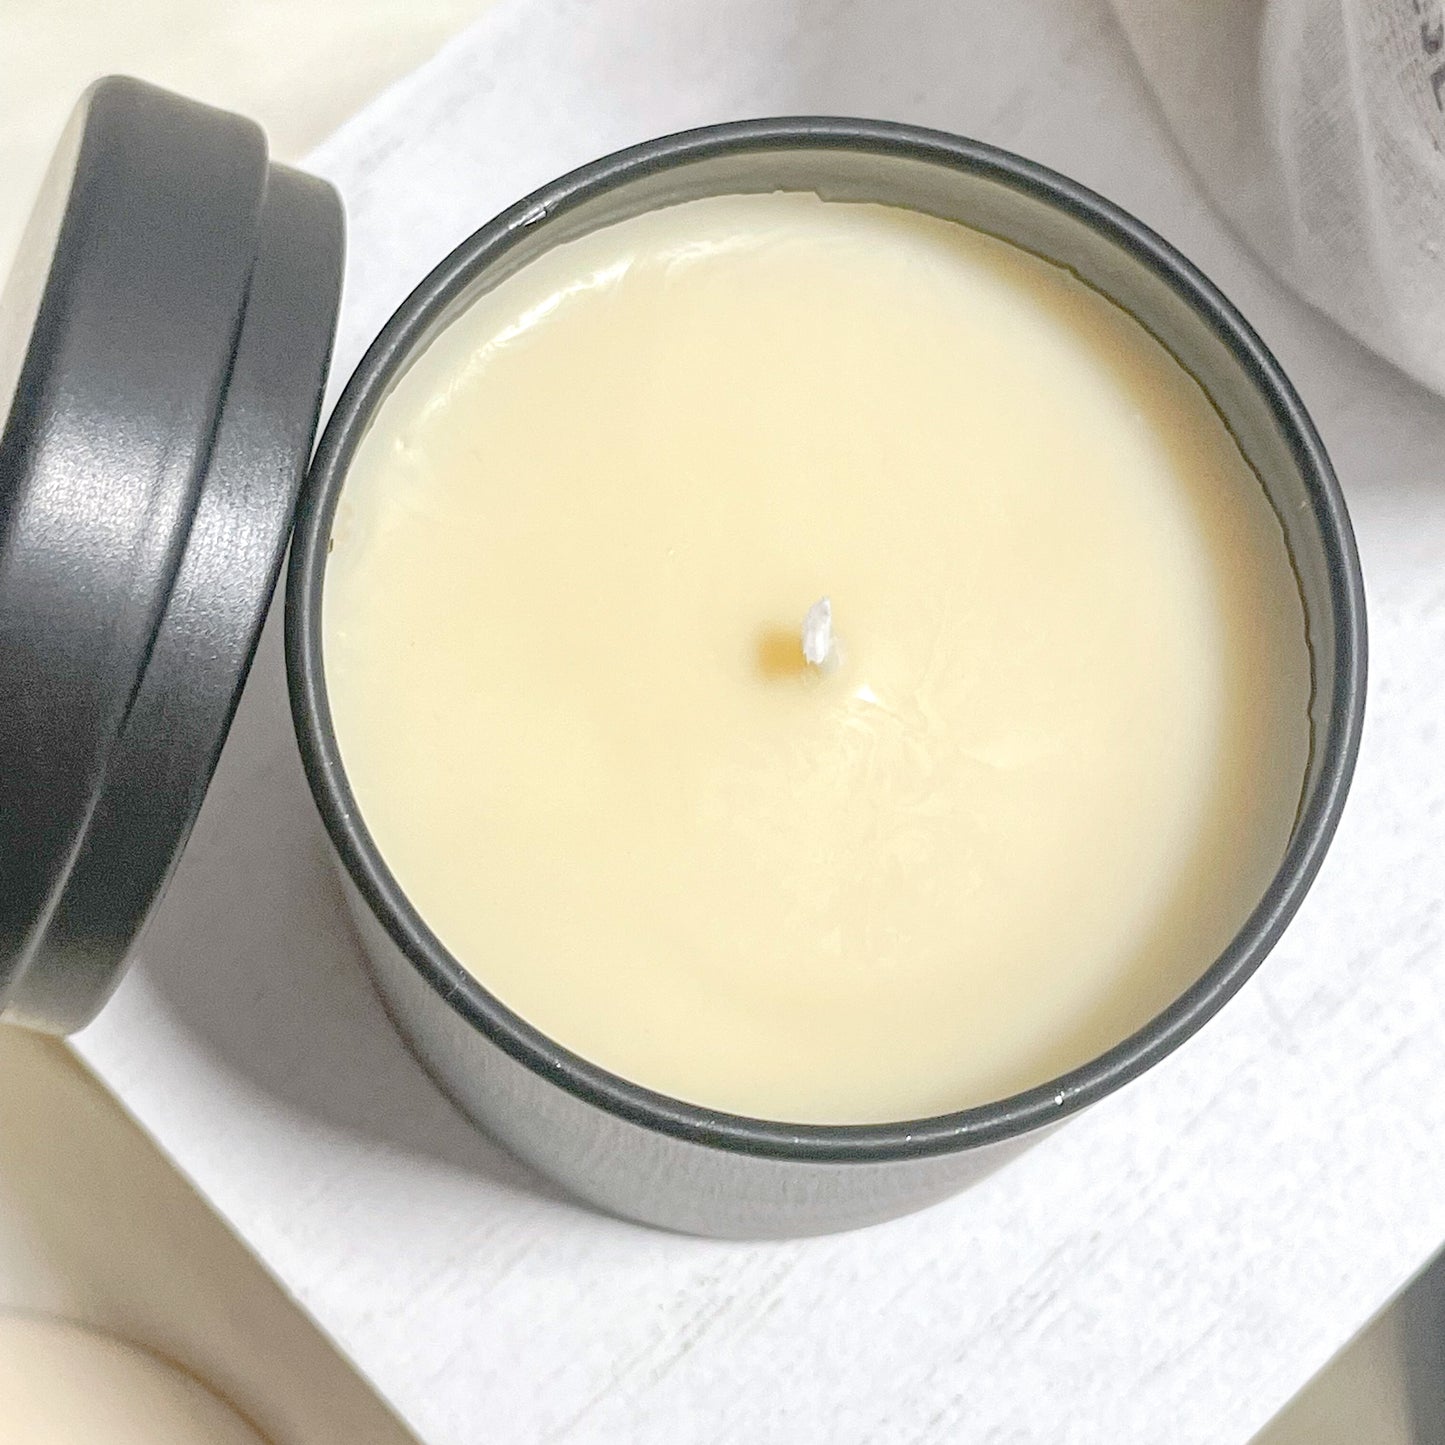 Allure Lotion Candle 3 oz - Desert Moon 25